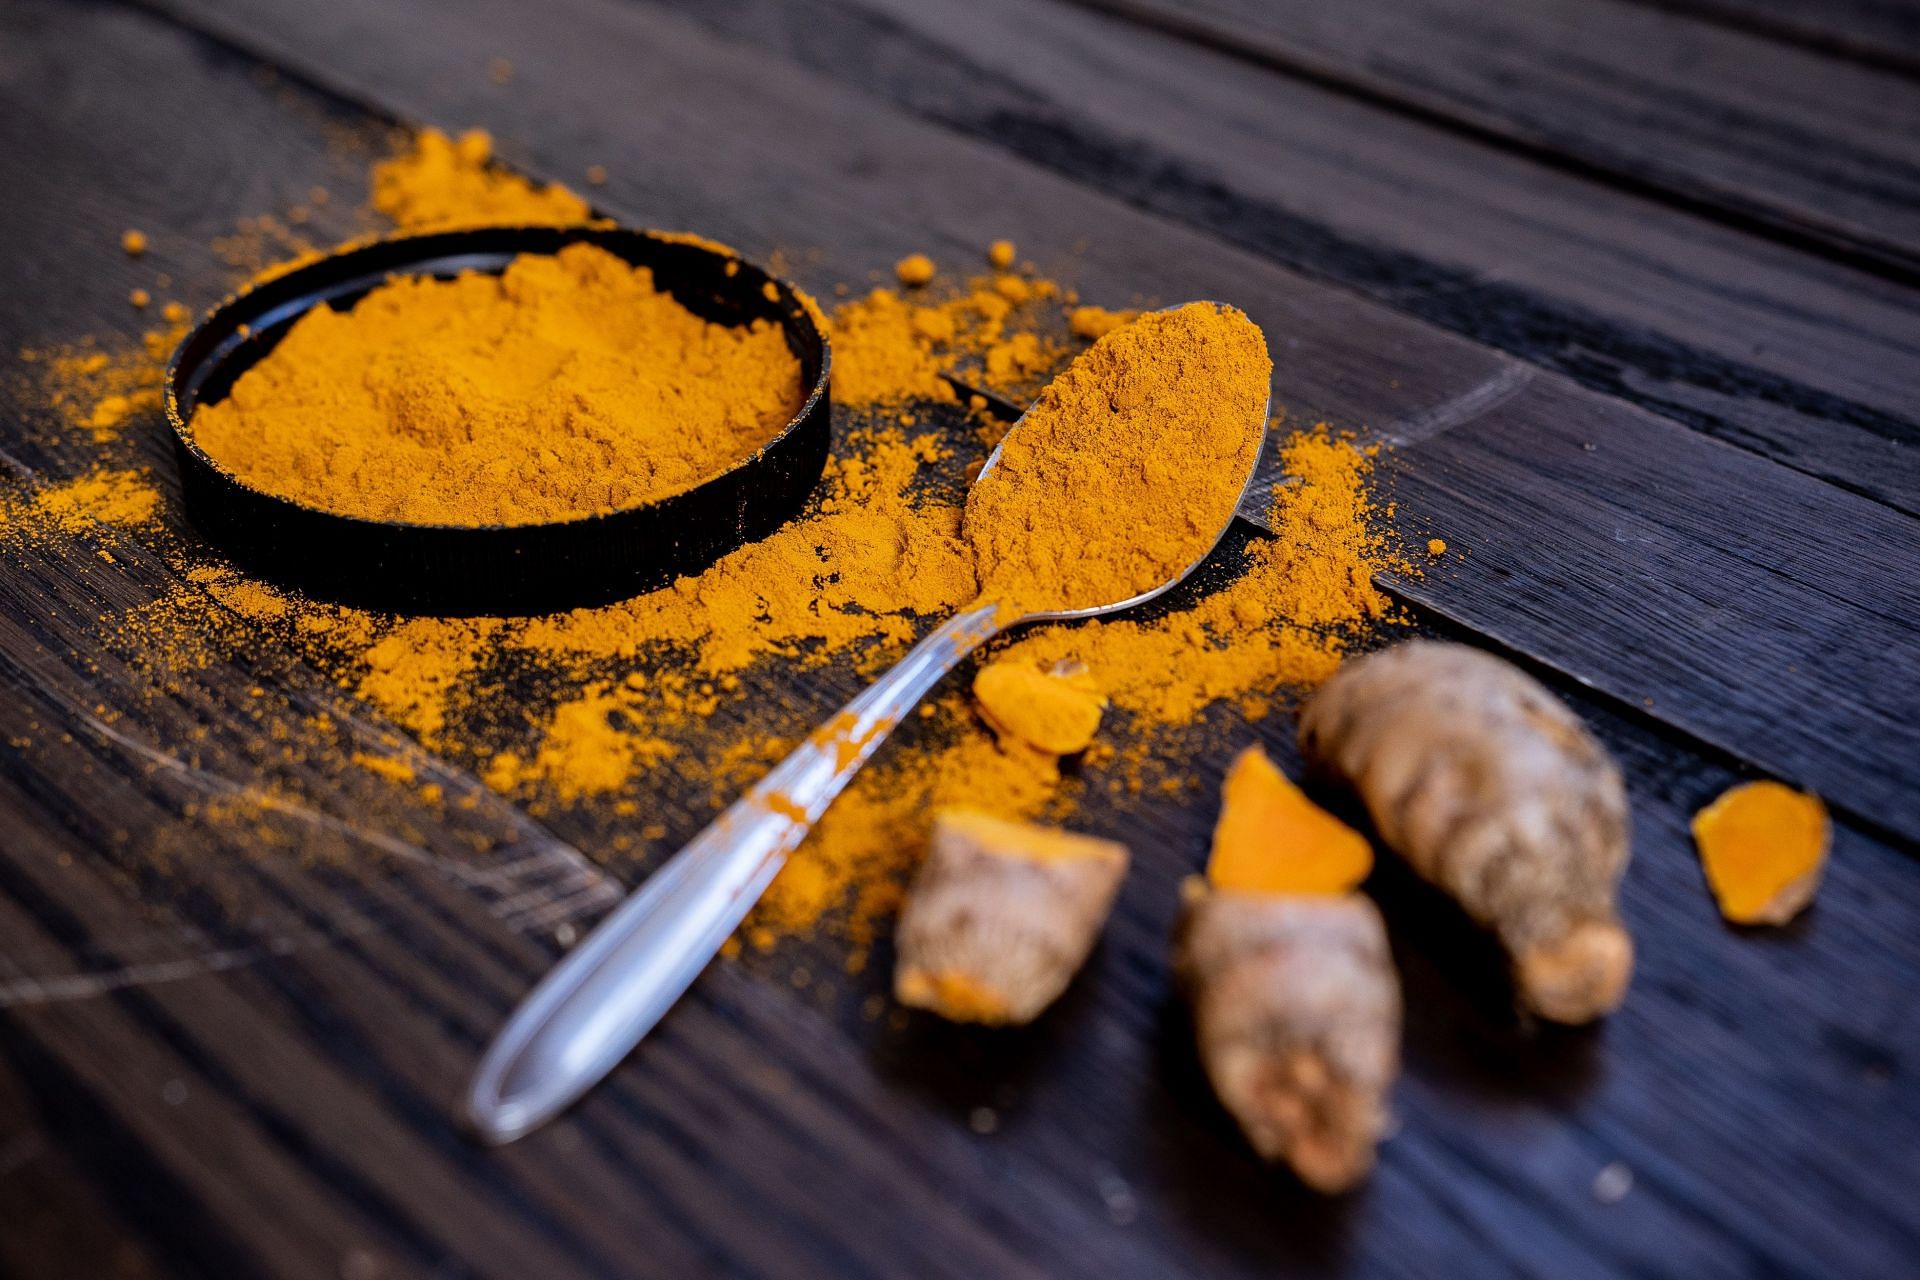 Active ingredient in turmeric has been shown to help increase fat burning. (Image via Pexels/Karl Solano )